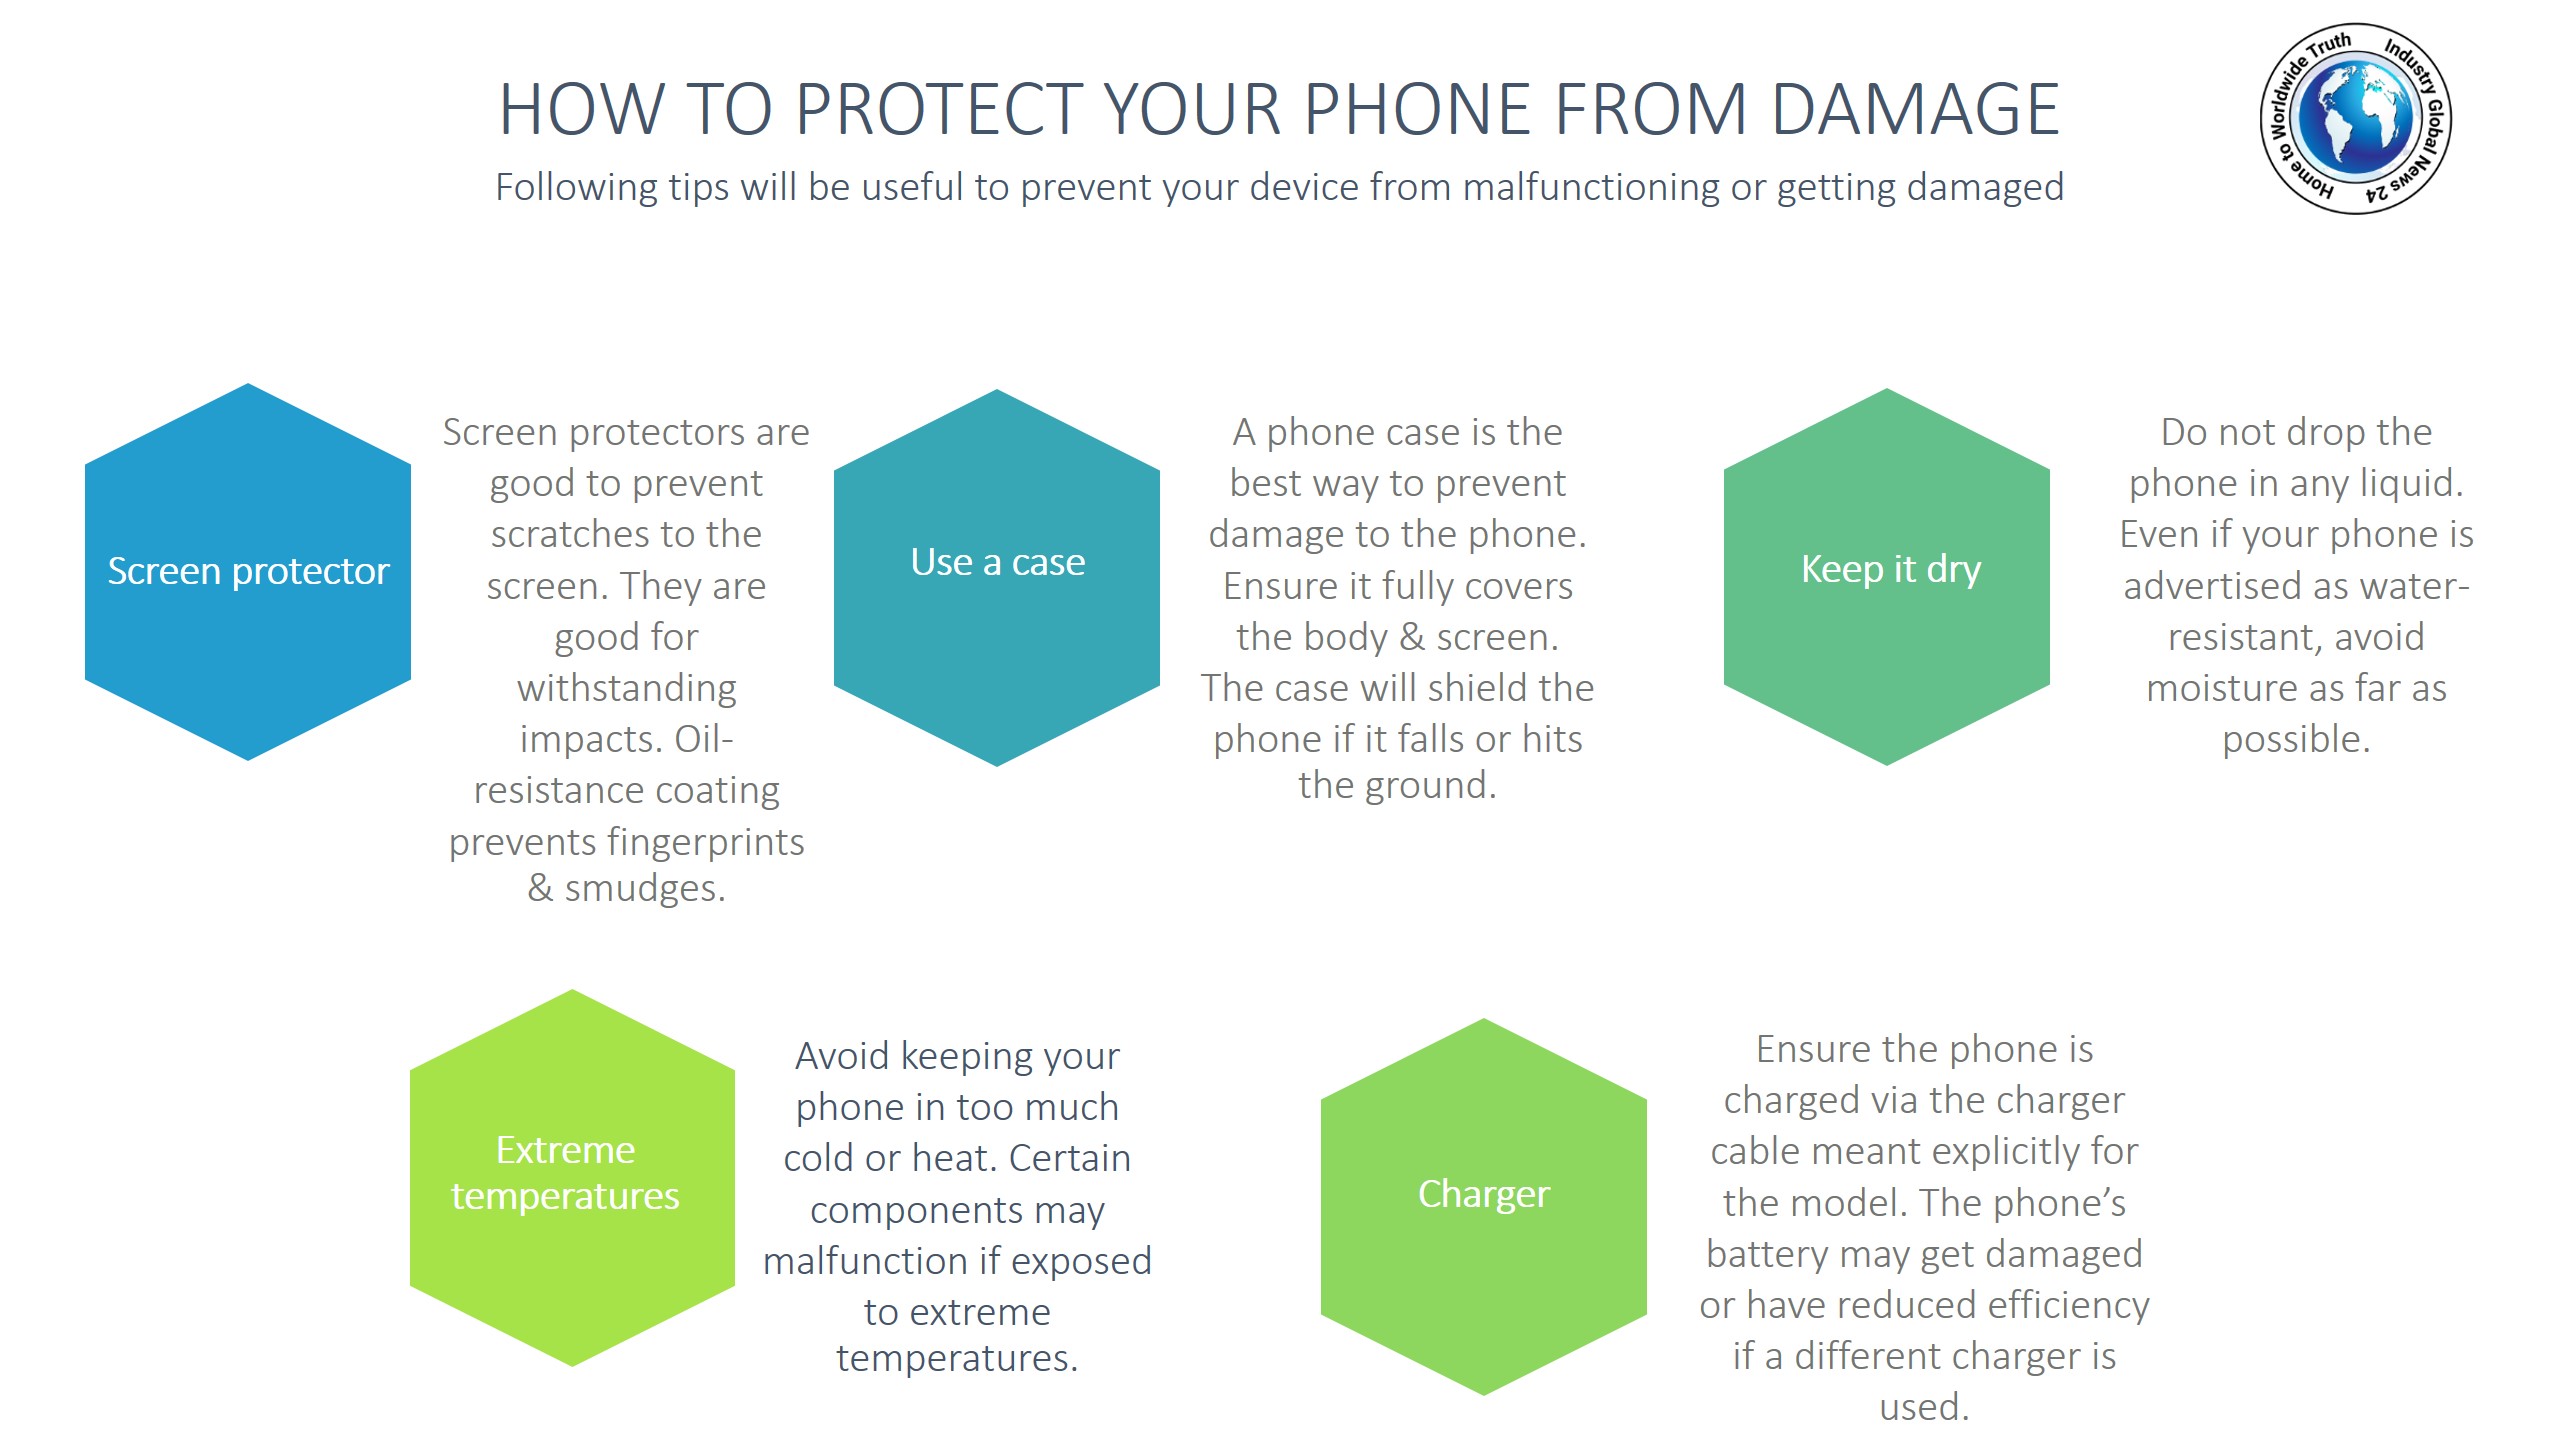 How to protect your phone from damage